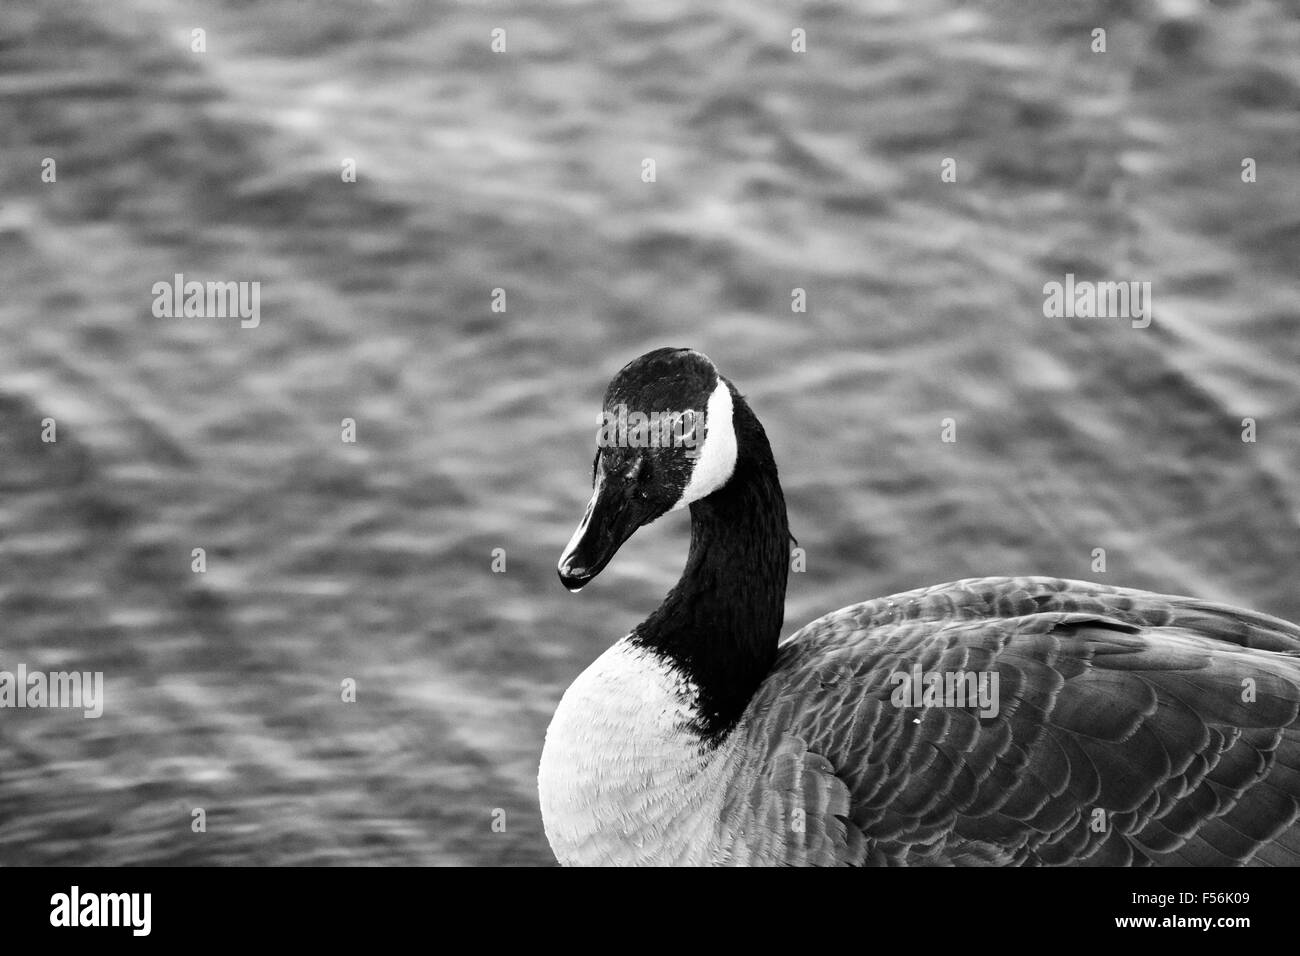 Beautiful black and white close-up of a Canada goose with the water background Stock Photo